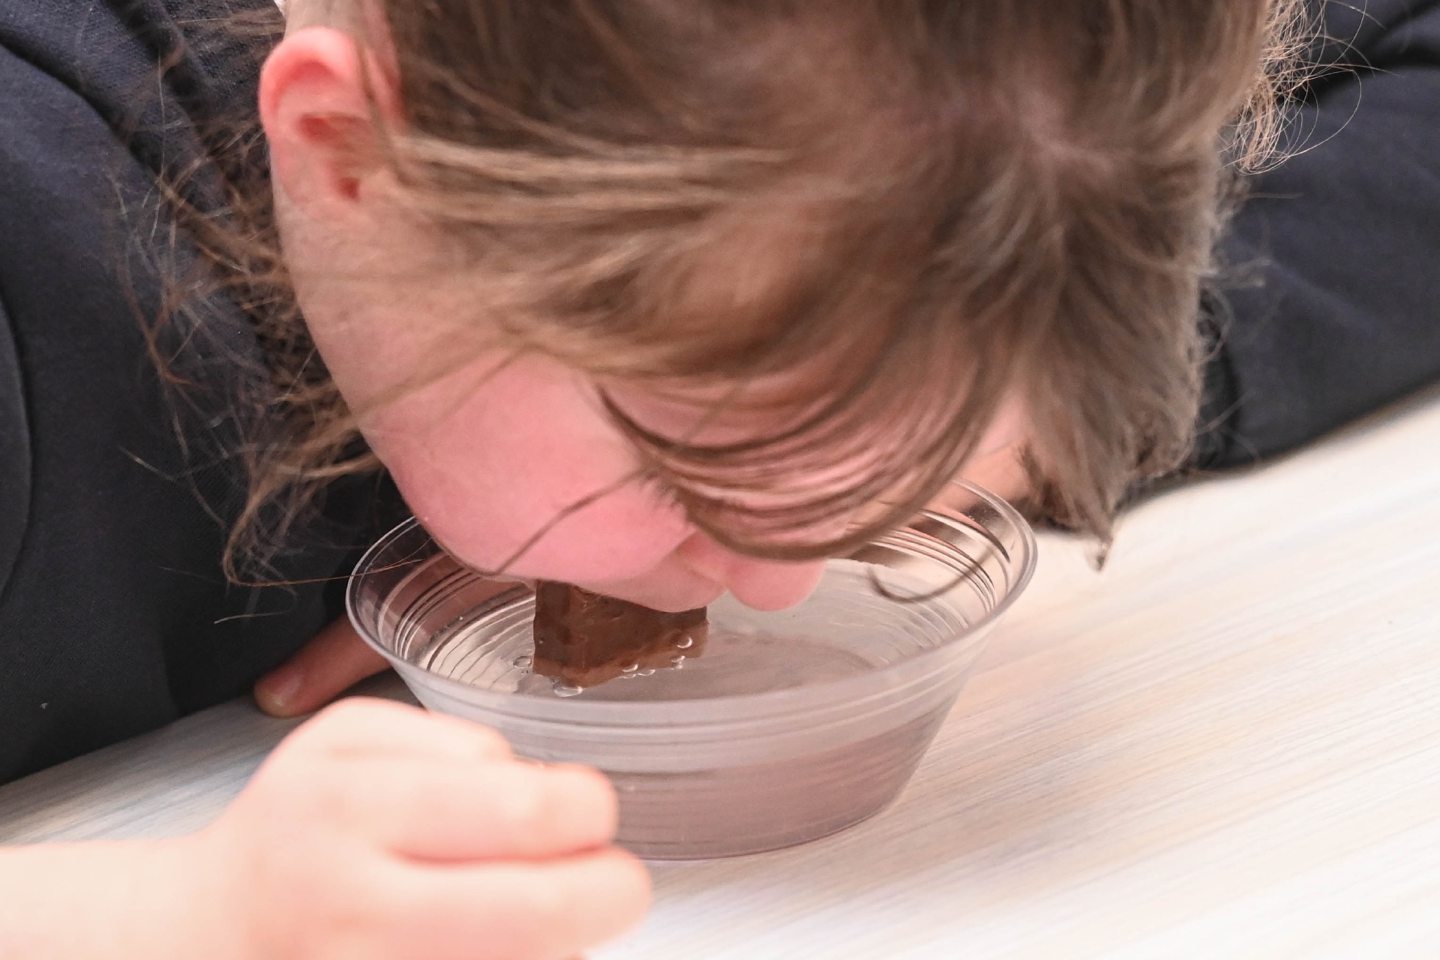 A child dipping a bar of chocolate in a bowl with their mouth